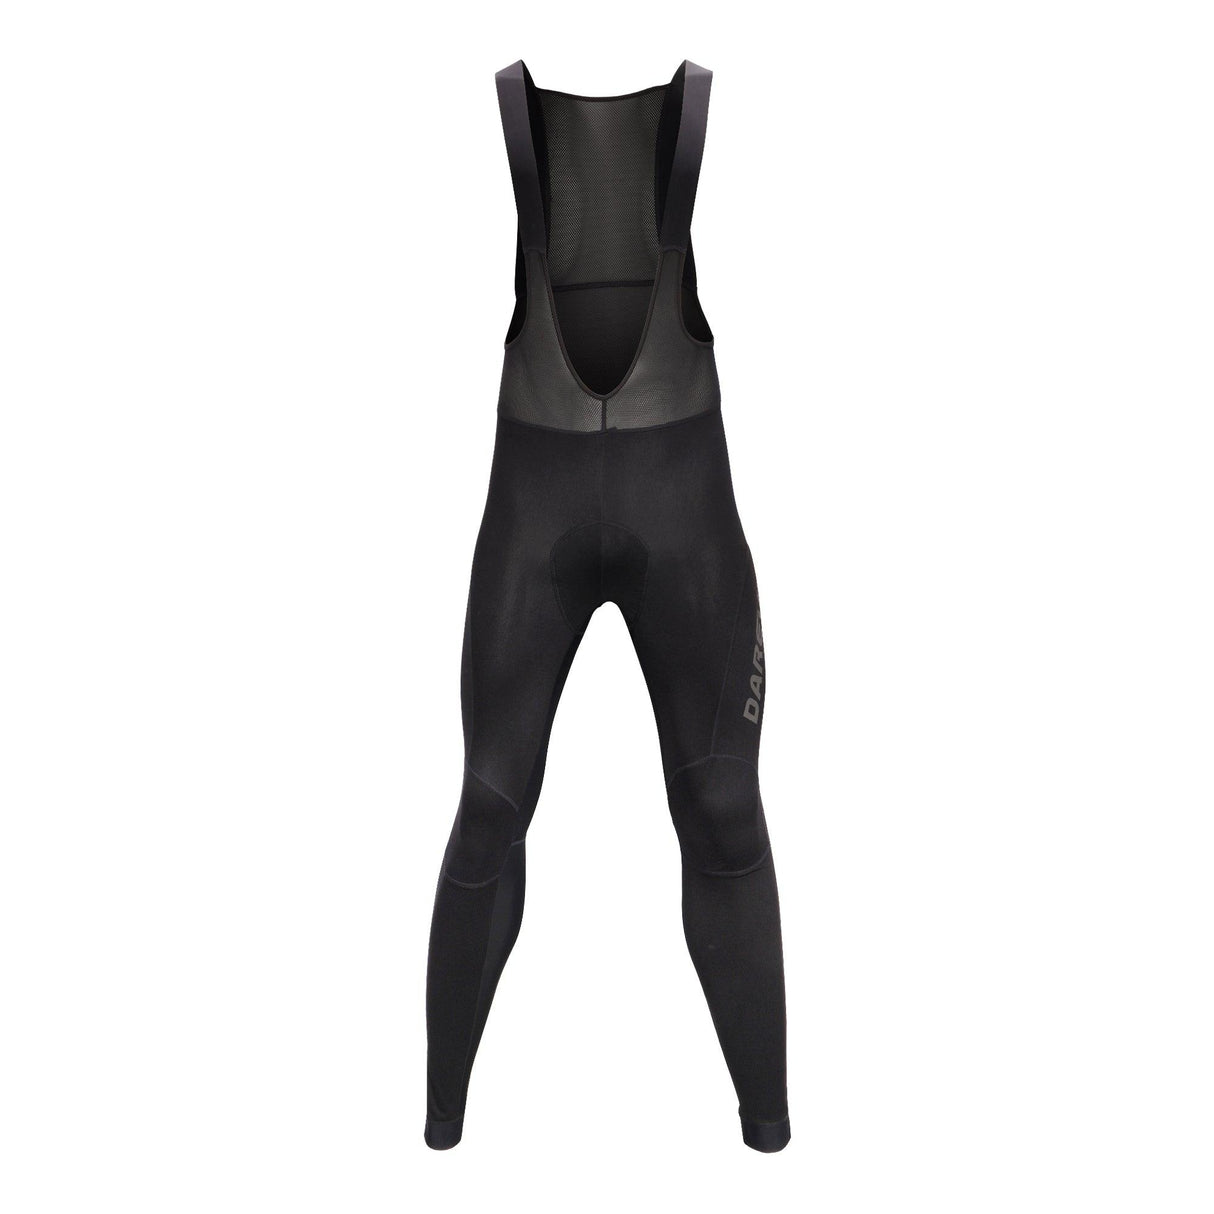 PEDALWISE CYCLING THERMAL BIB TIGHTS – Darevie Shop